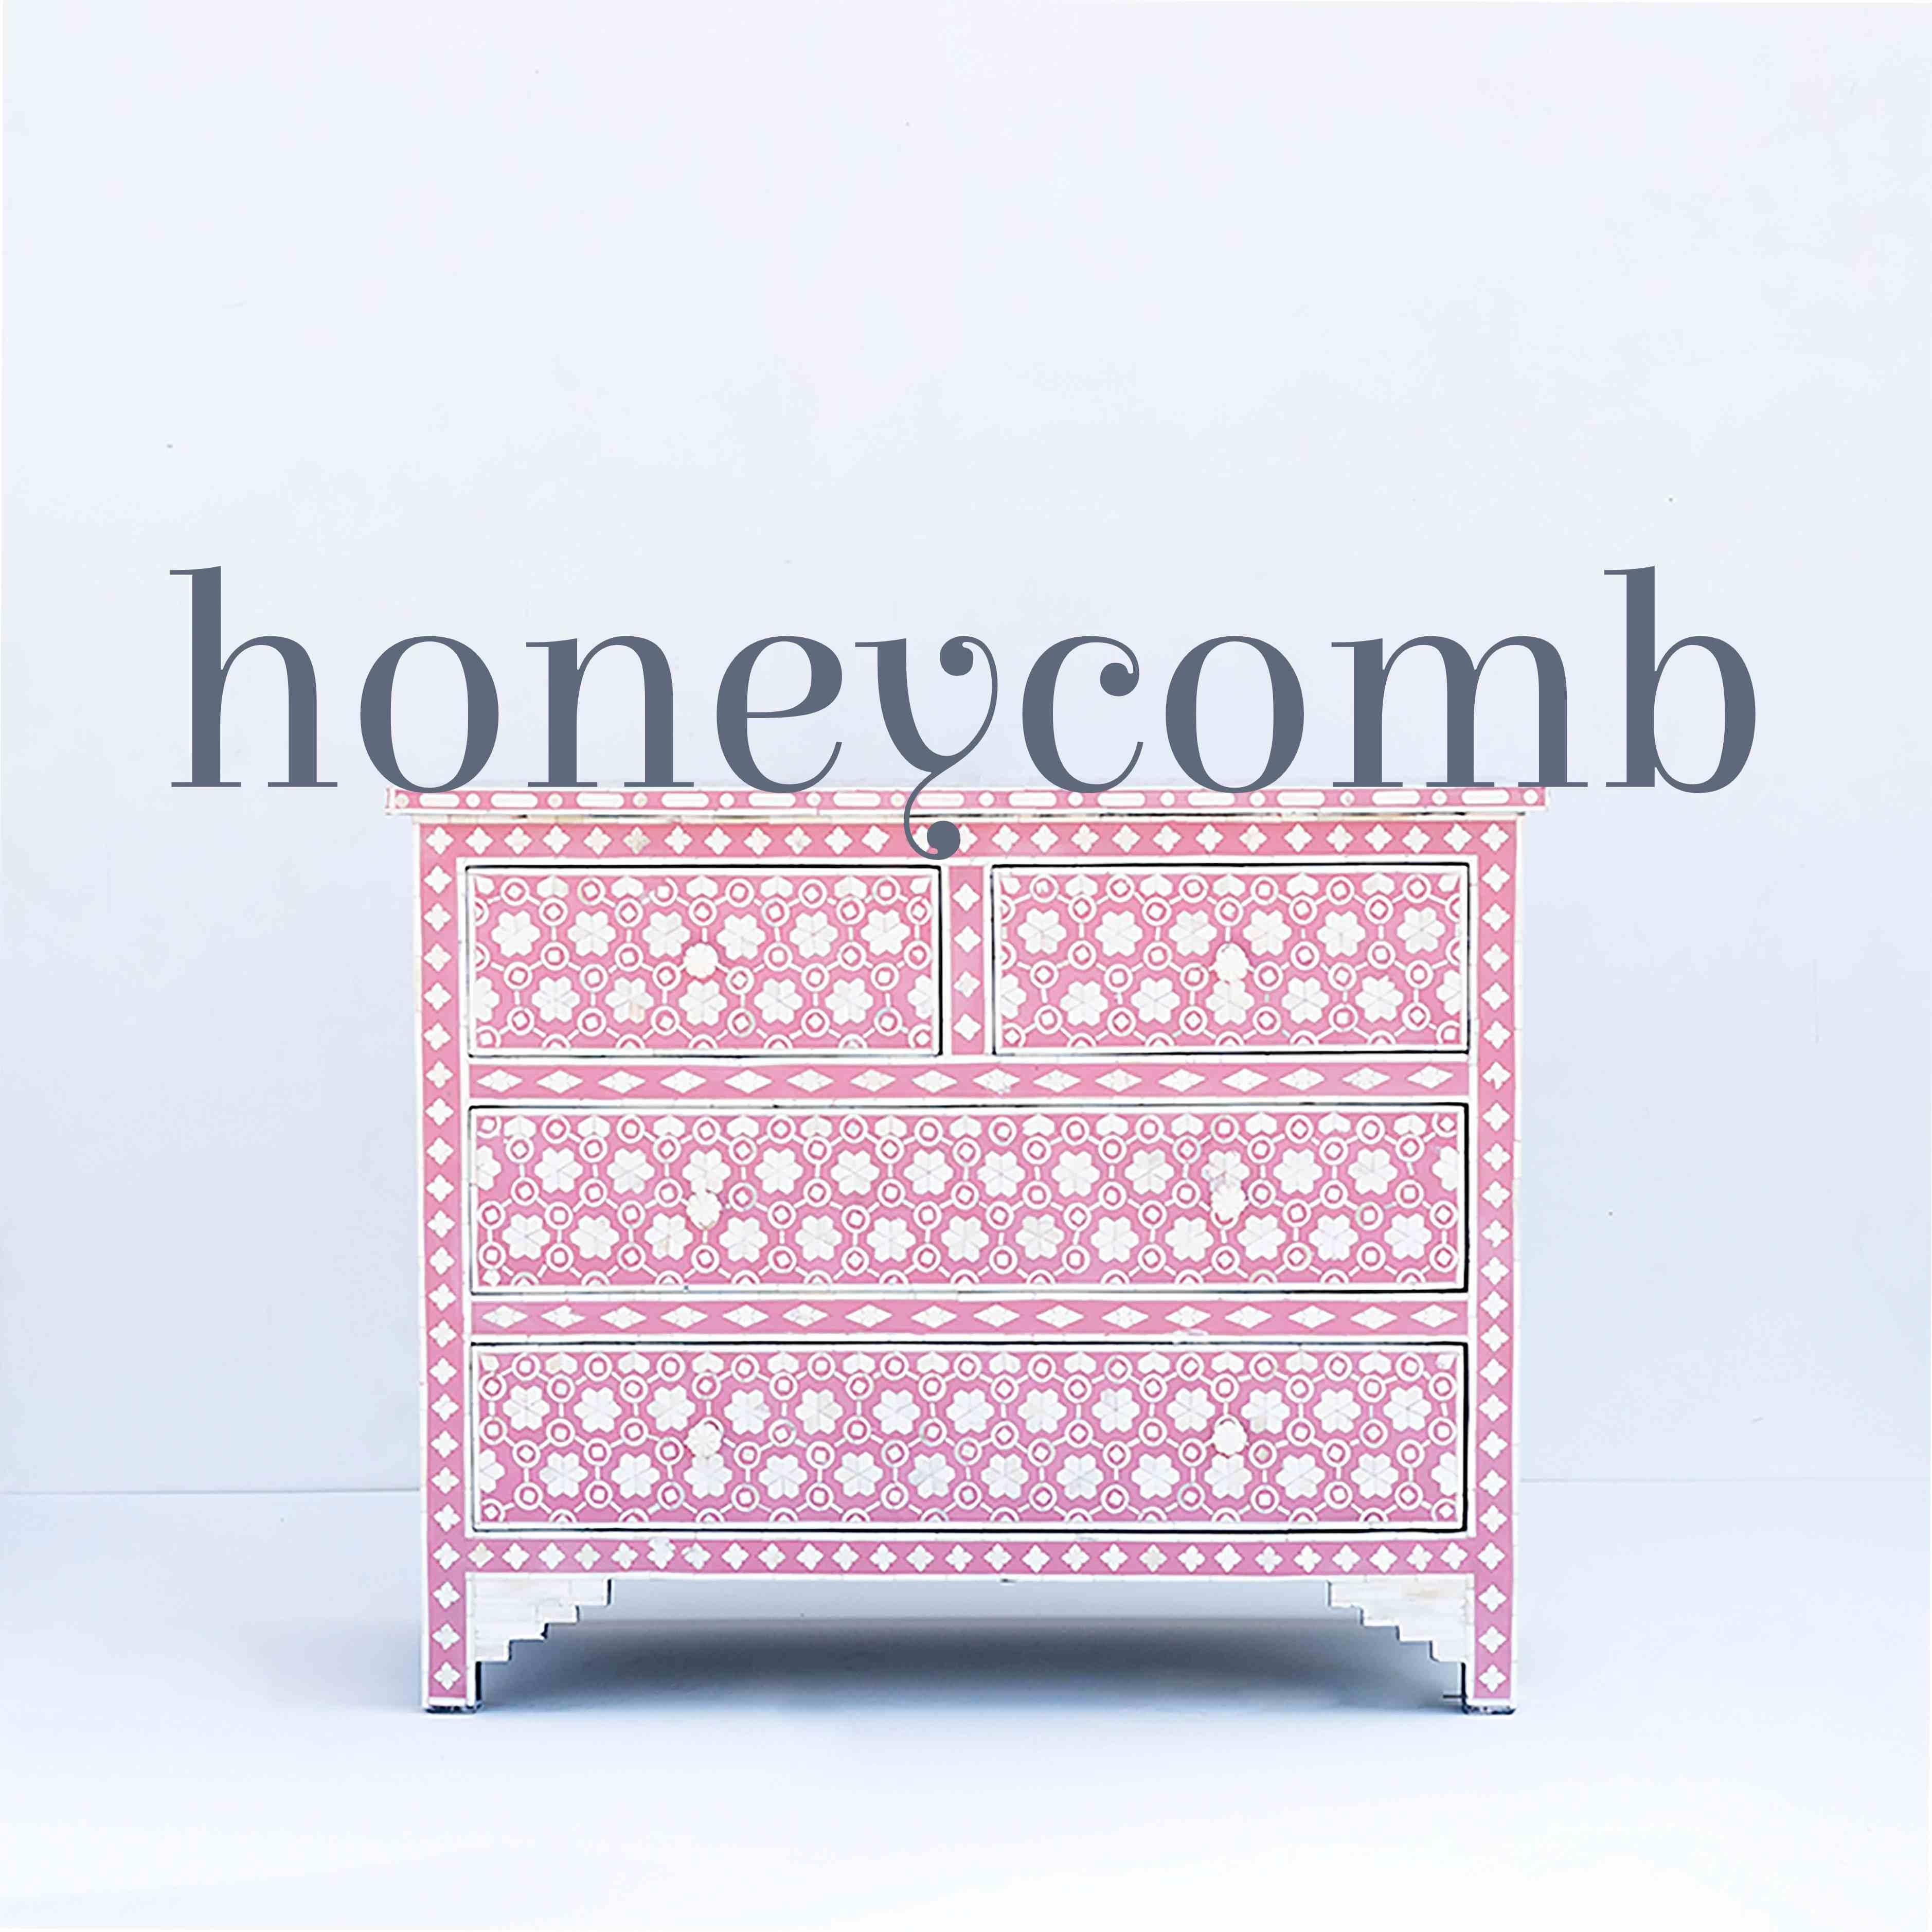 Introducing our exquisite Bone Inlay Dresser, an undeniable statement piece for any bedroom or living room. This stunning four drawer dresser is entirely handmade, featuring intricate bone inlay honeycomb flower patterns that are nothing short of